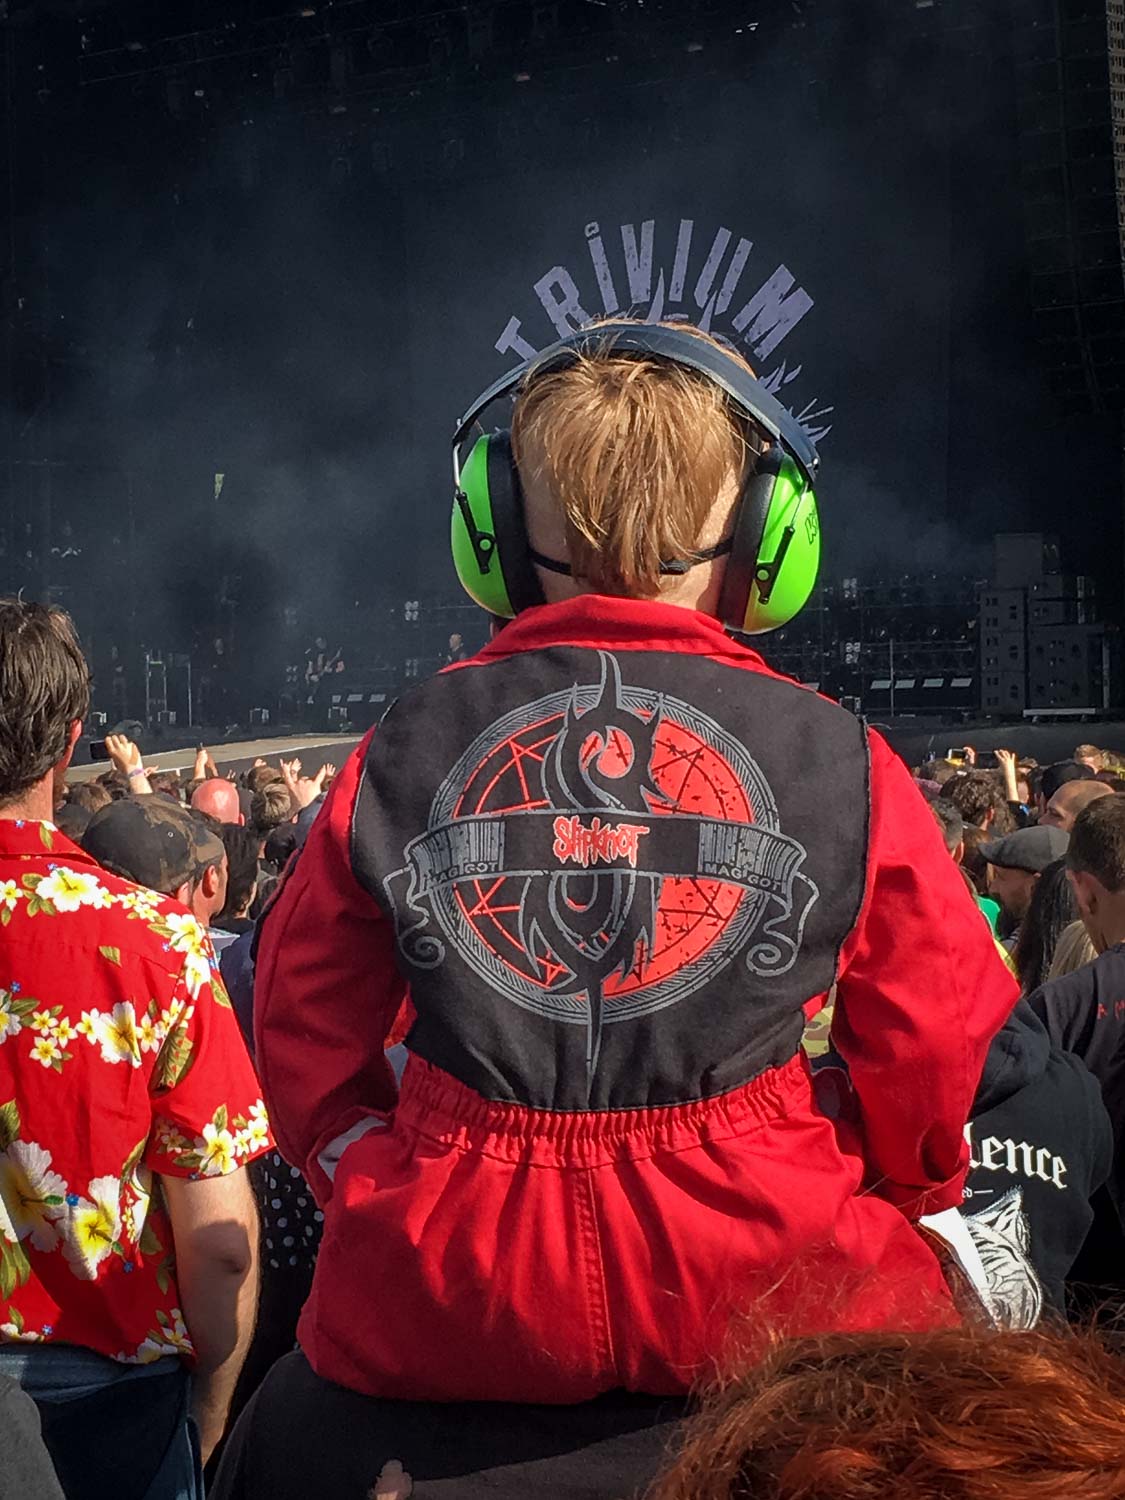  Probably the youngest fan of the festival 